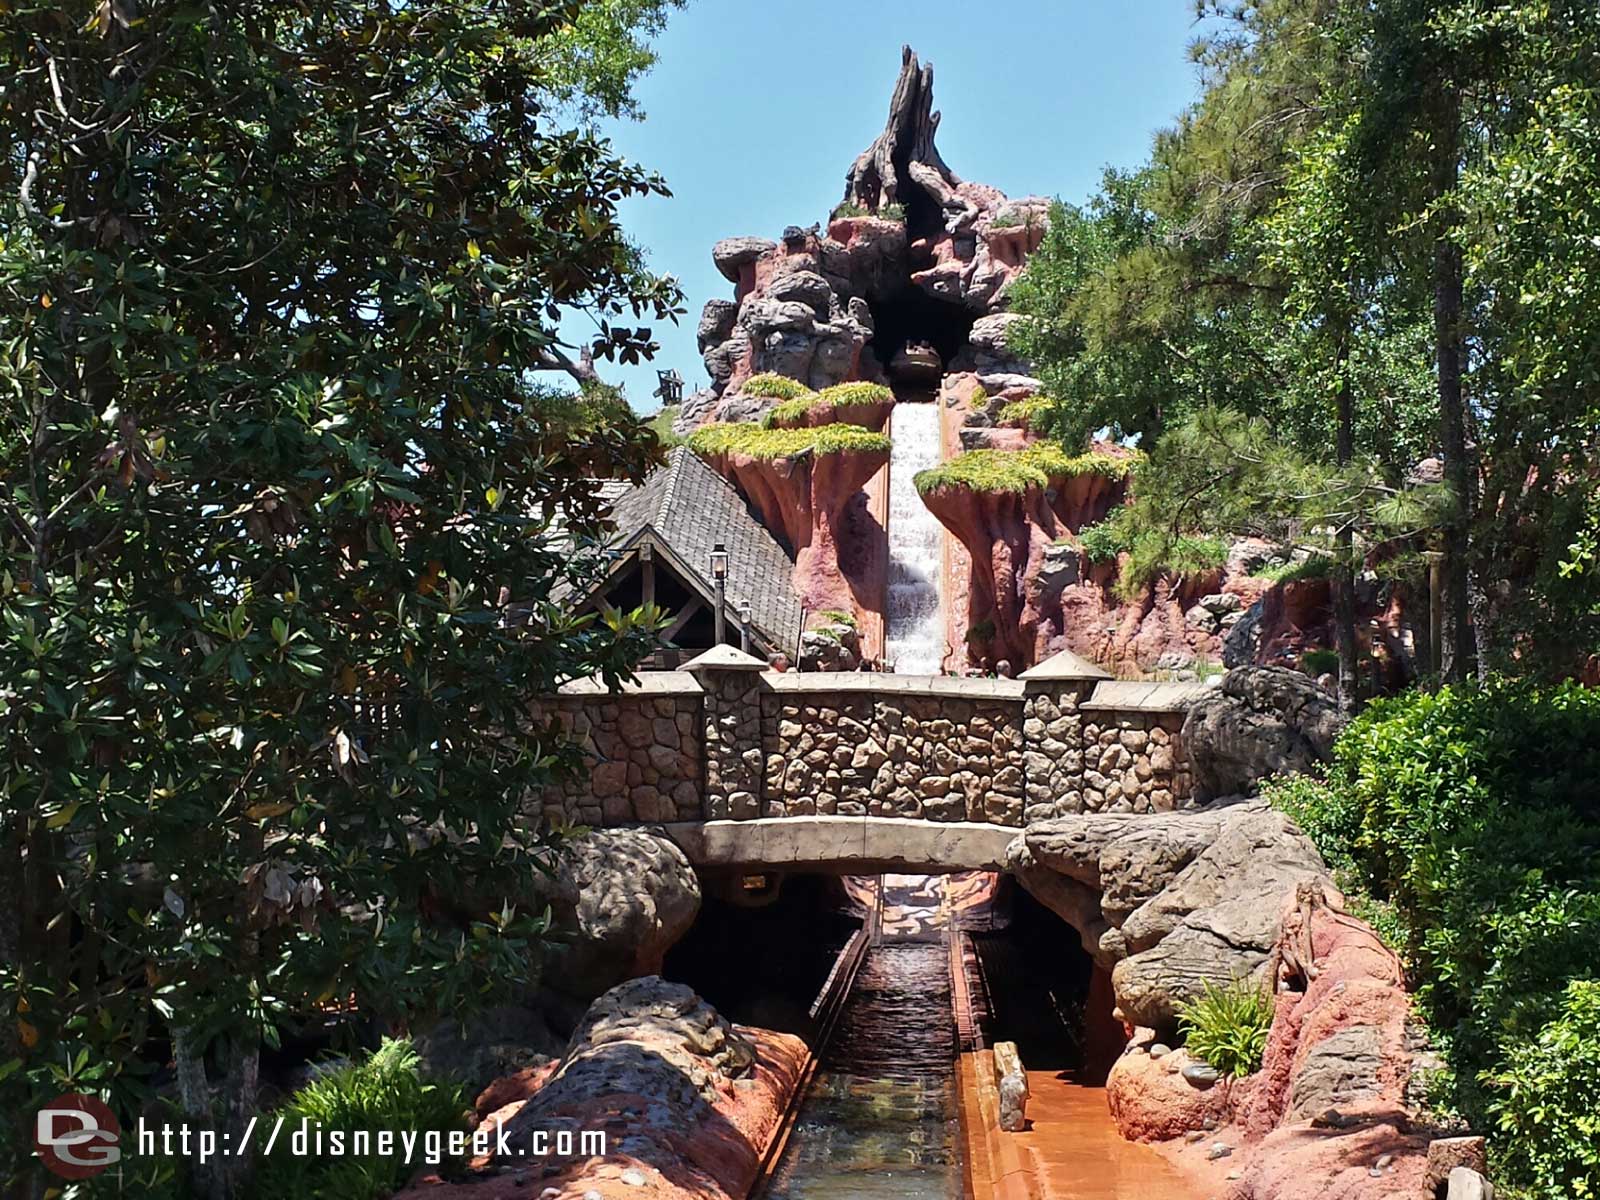 Passing by Splash Mountain at the Magic Kingdom